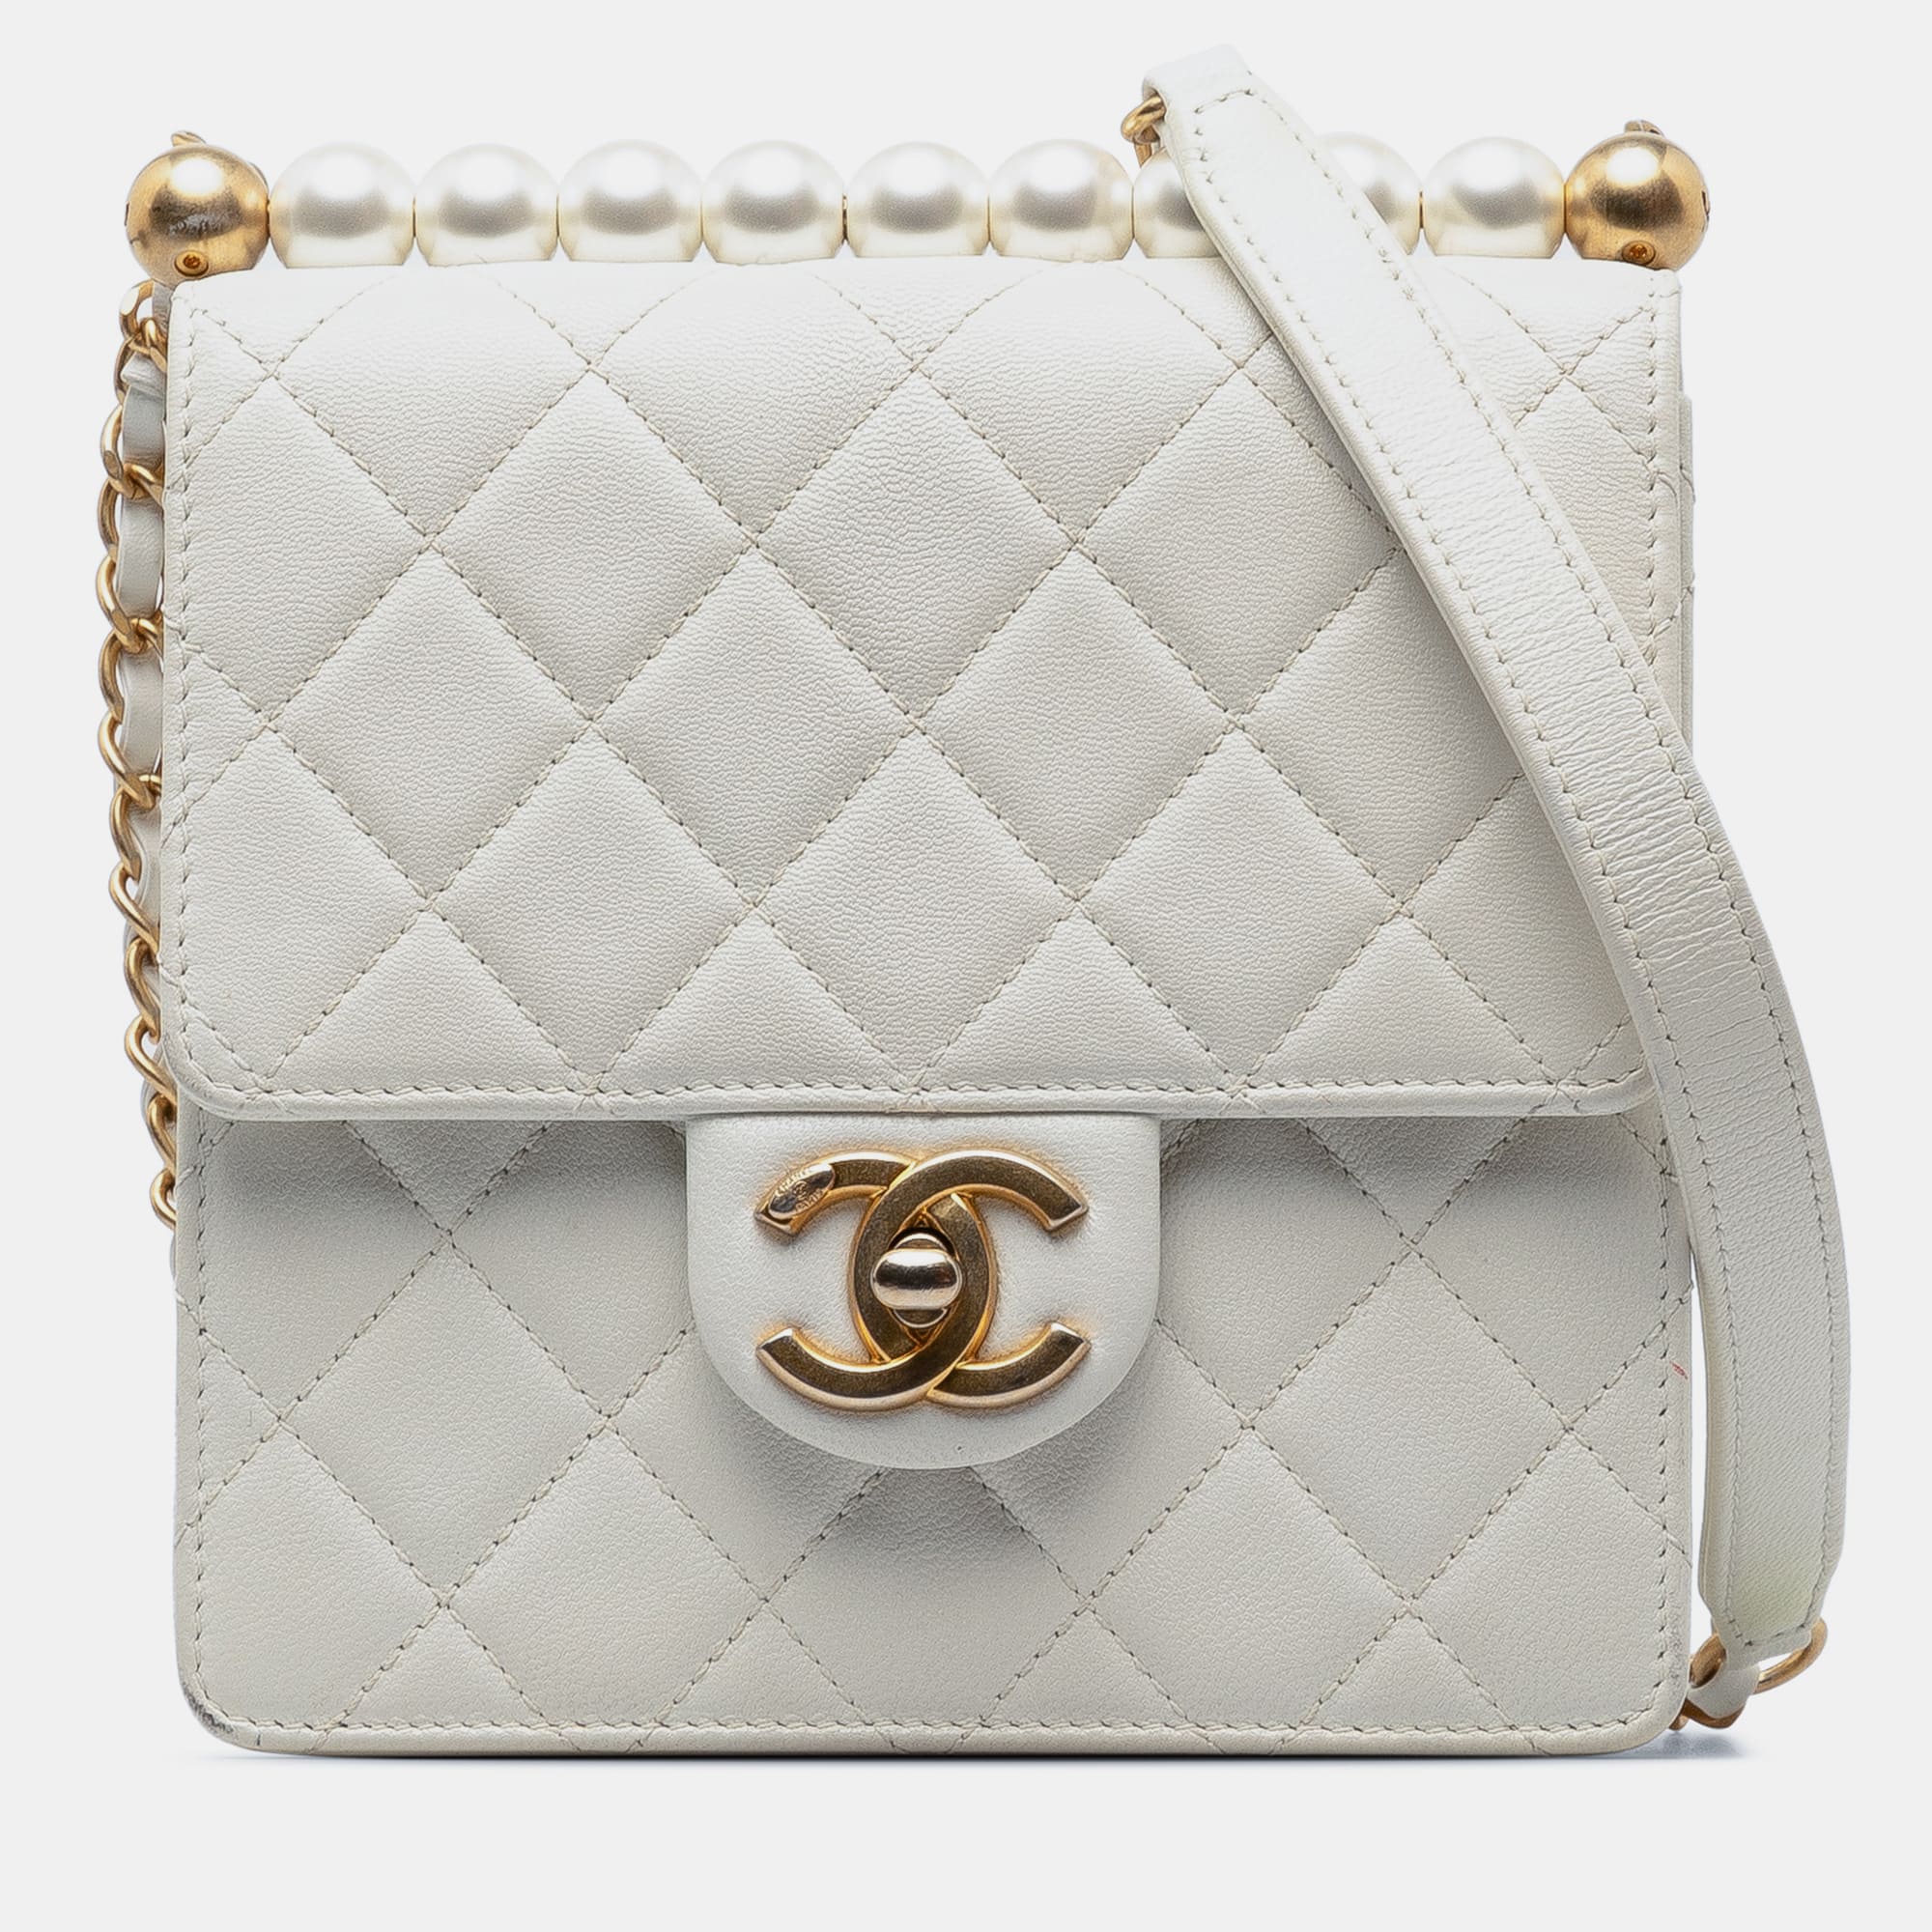 

Chanel Small Lambskin Chic Pearls Flap Bag, White